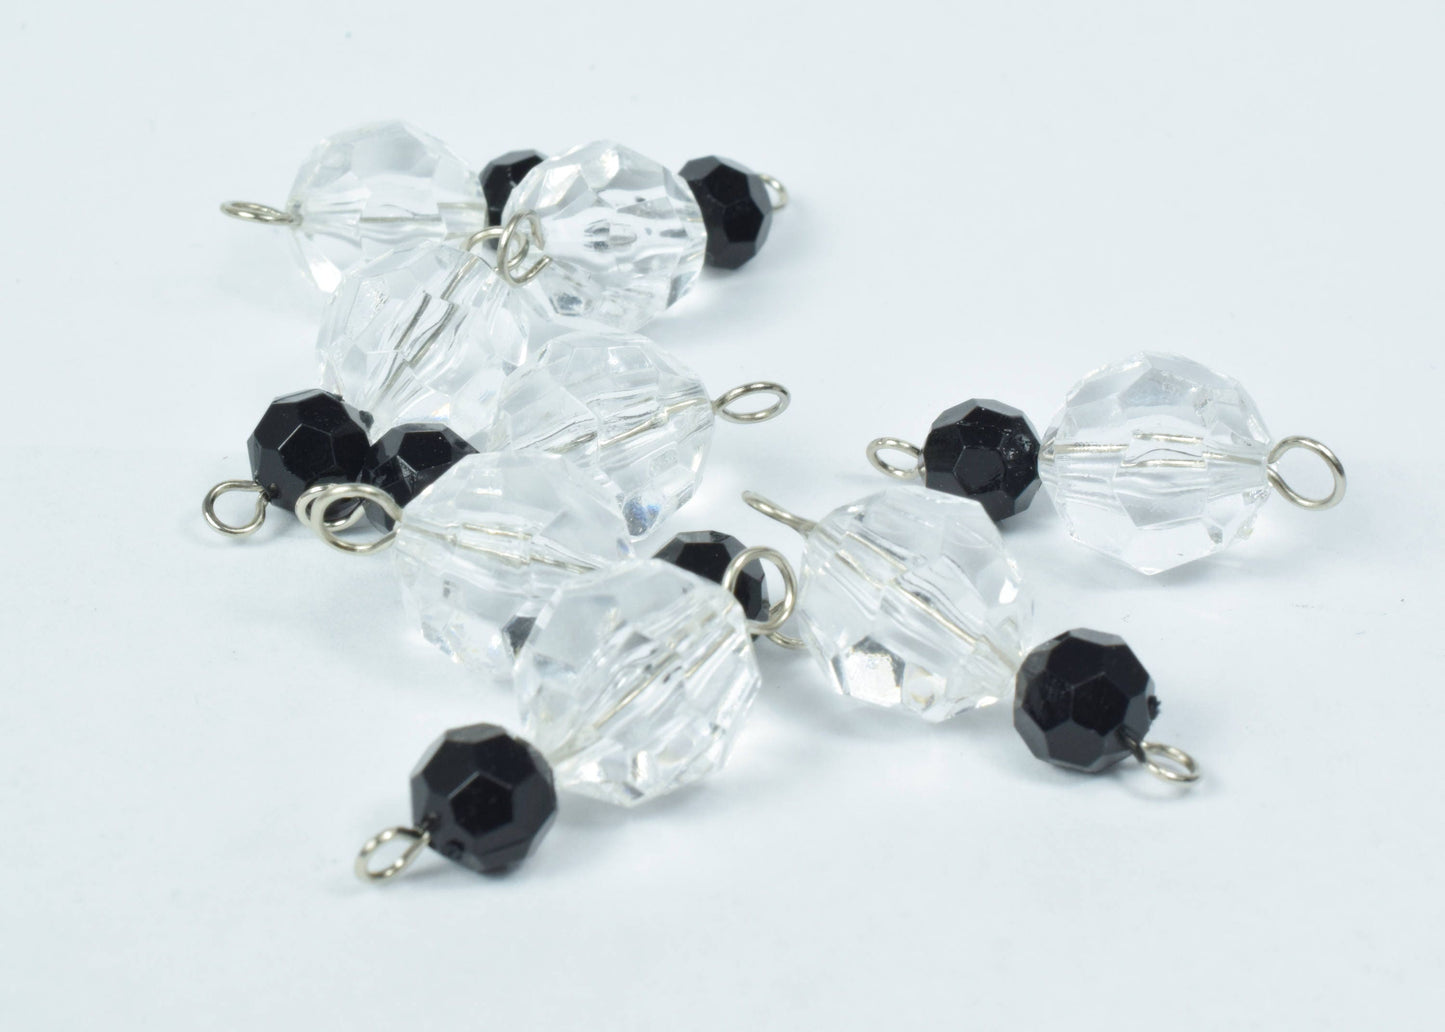 15 x 32 mm Faceted Lucite Plastic Bead Earring Connector Findings/2-Tier Plastic Faceted Plastic Bead Connector/earring findings/eyepin